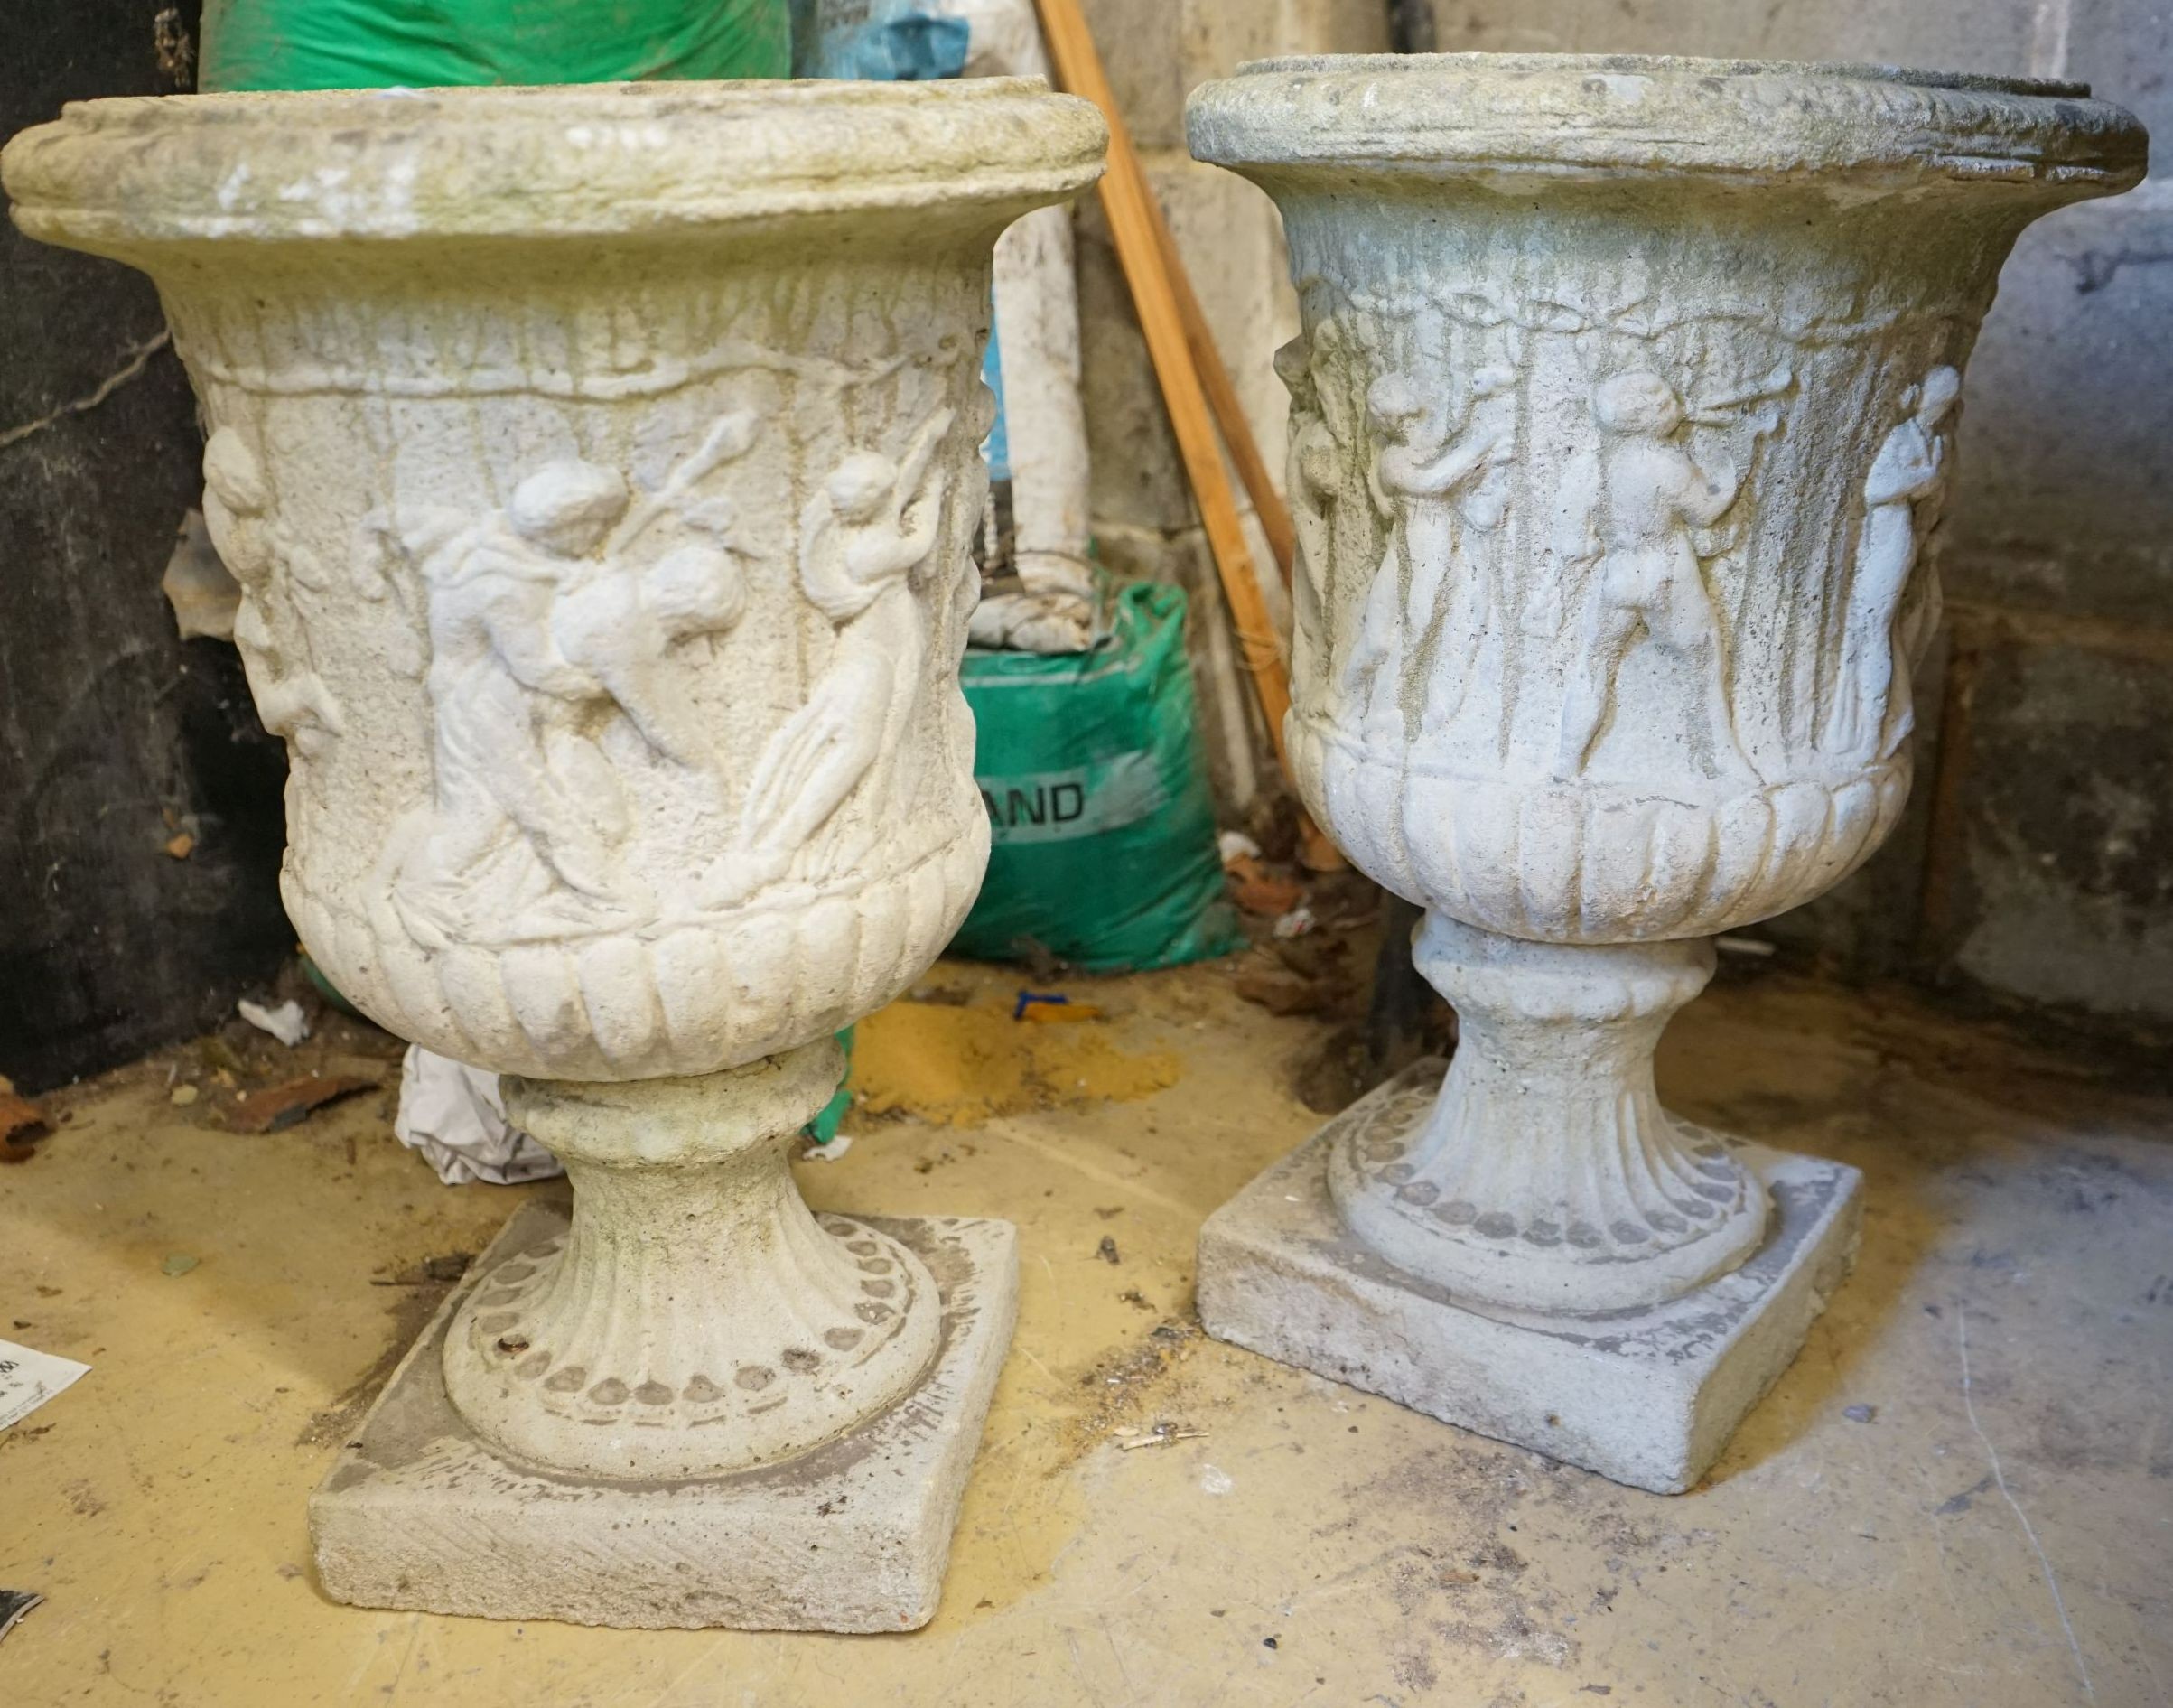 A pair of reconstituted stone campana garden urns, height 52cm